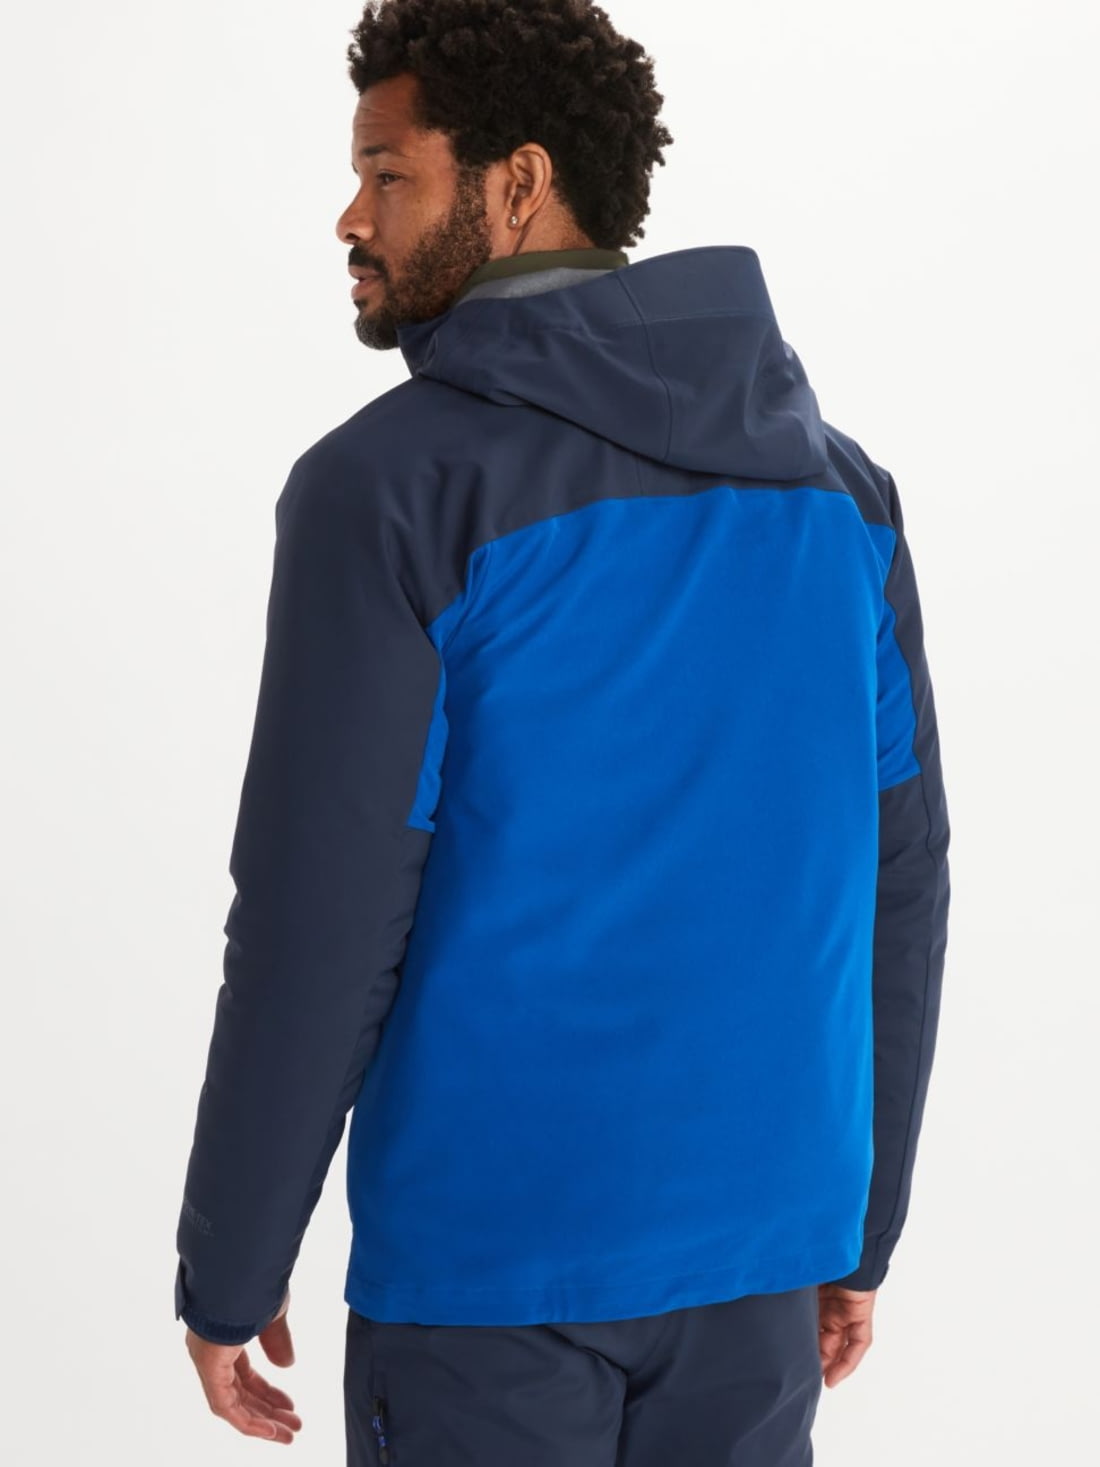 funcampshop - Don't Pay Full Price for Store Marmot ROM GORE-TEX Infinium - Men's Save up to 50%